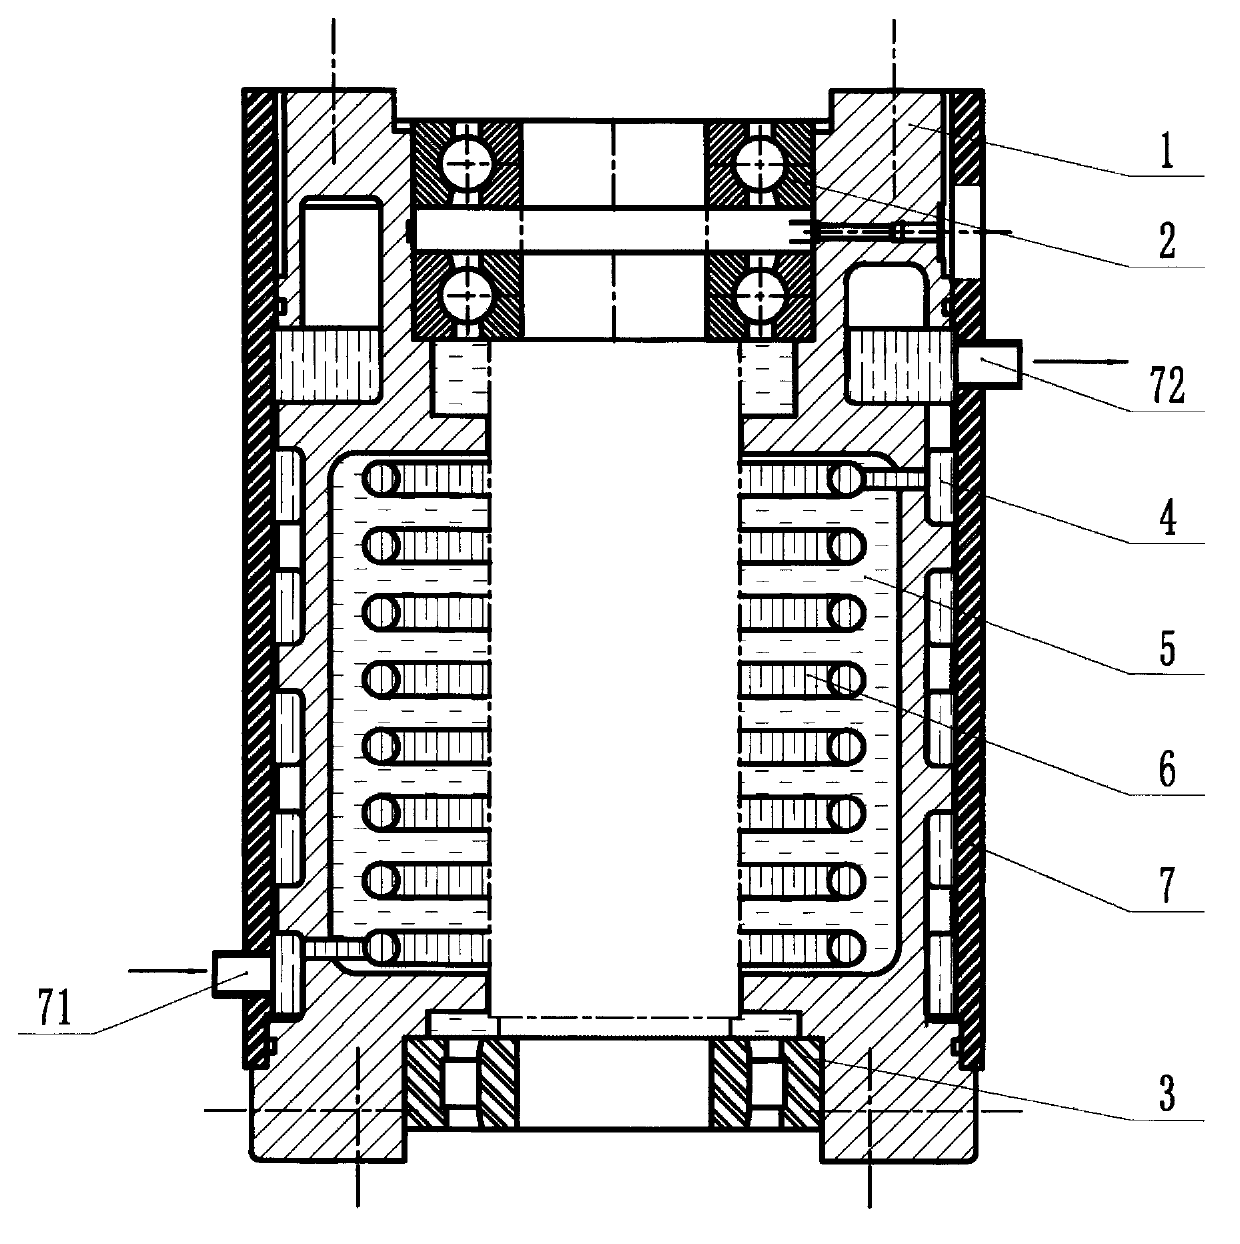 Waste heat discharge pump shaft cooling structure